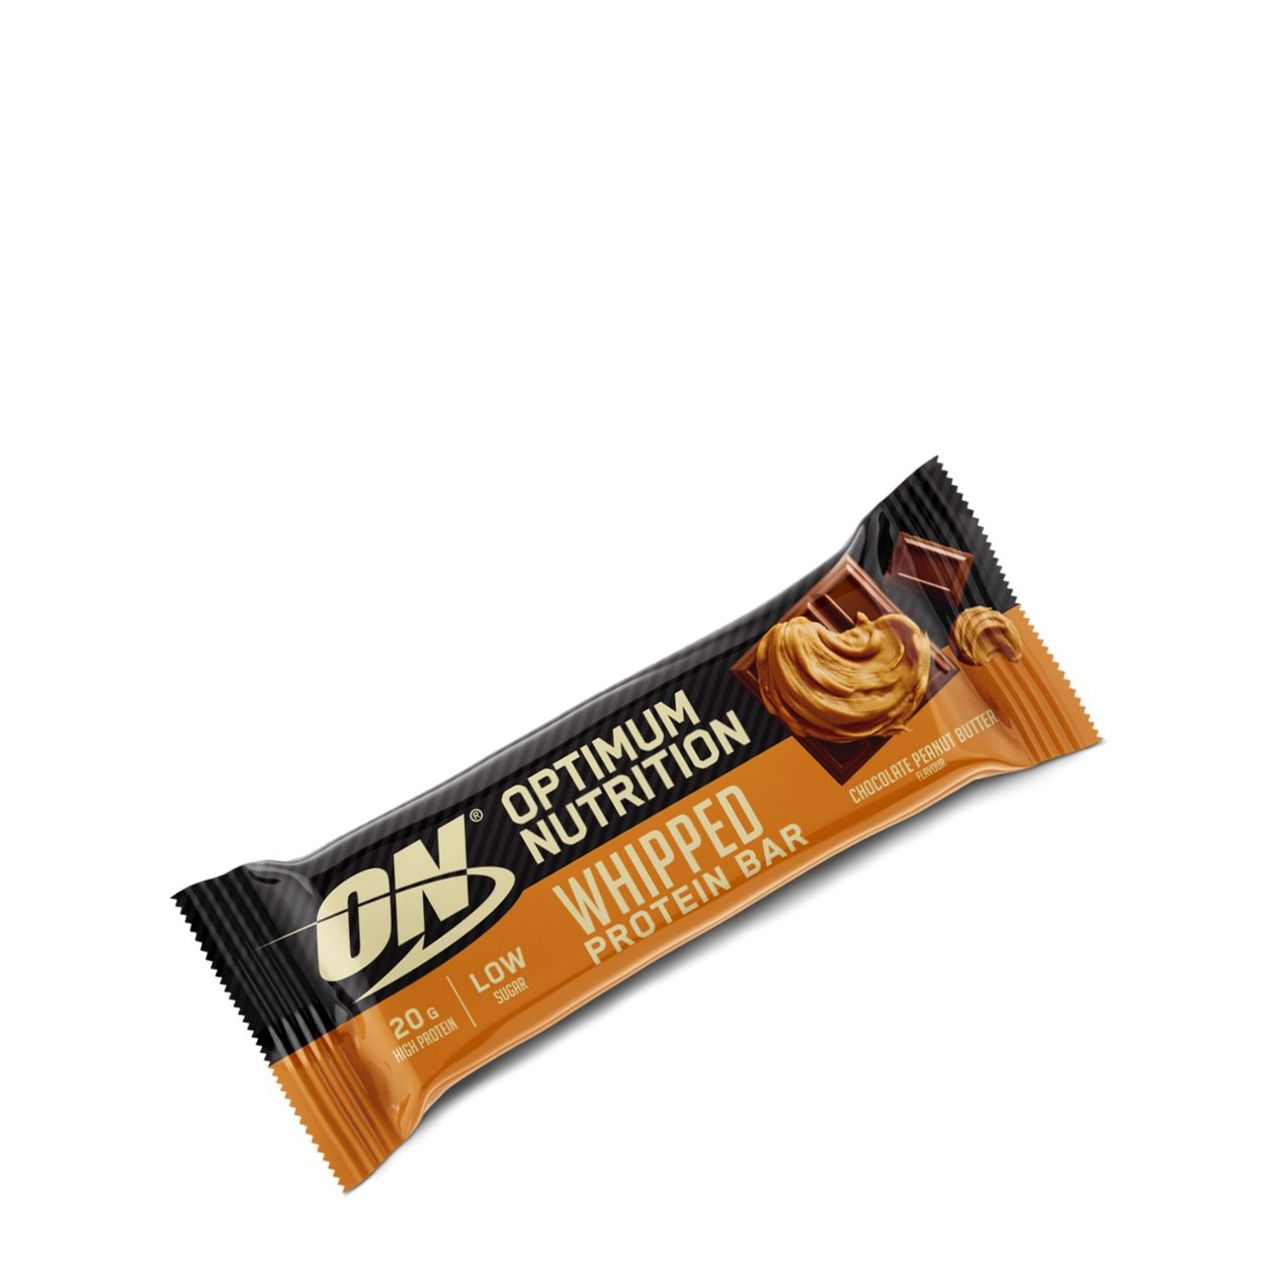 OPTIMUM NUTRITION - WHIPPED PROTEIN BAR - 60 G